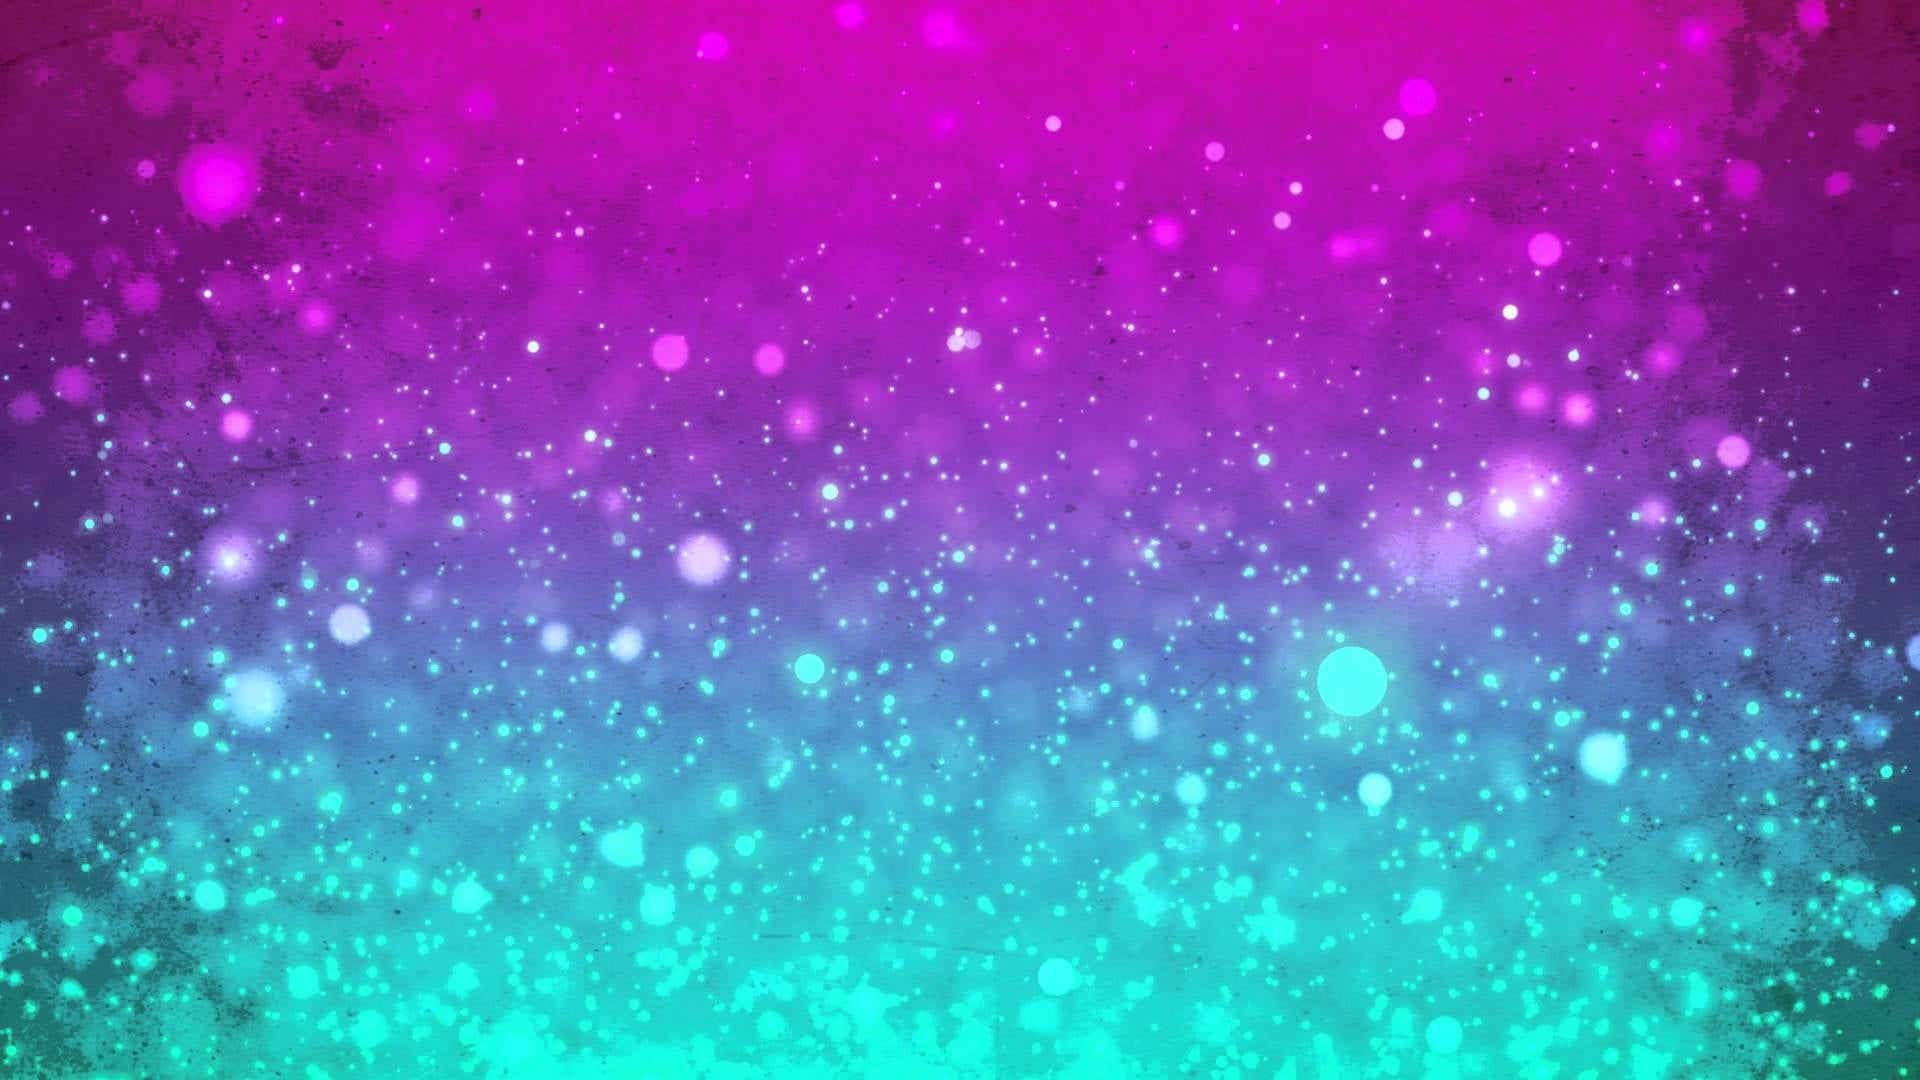 Pink Purple and Turquoise Wallpaper Free Pink Purple and Turquoise Background